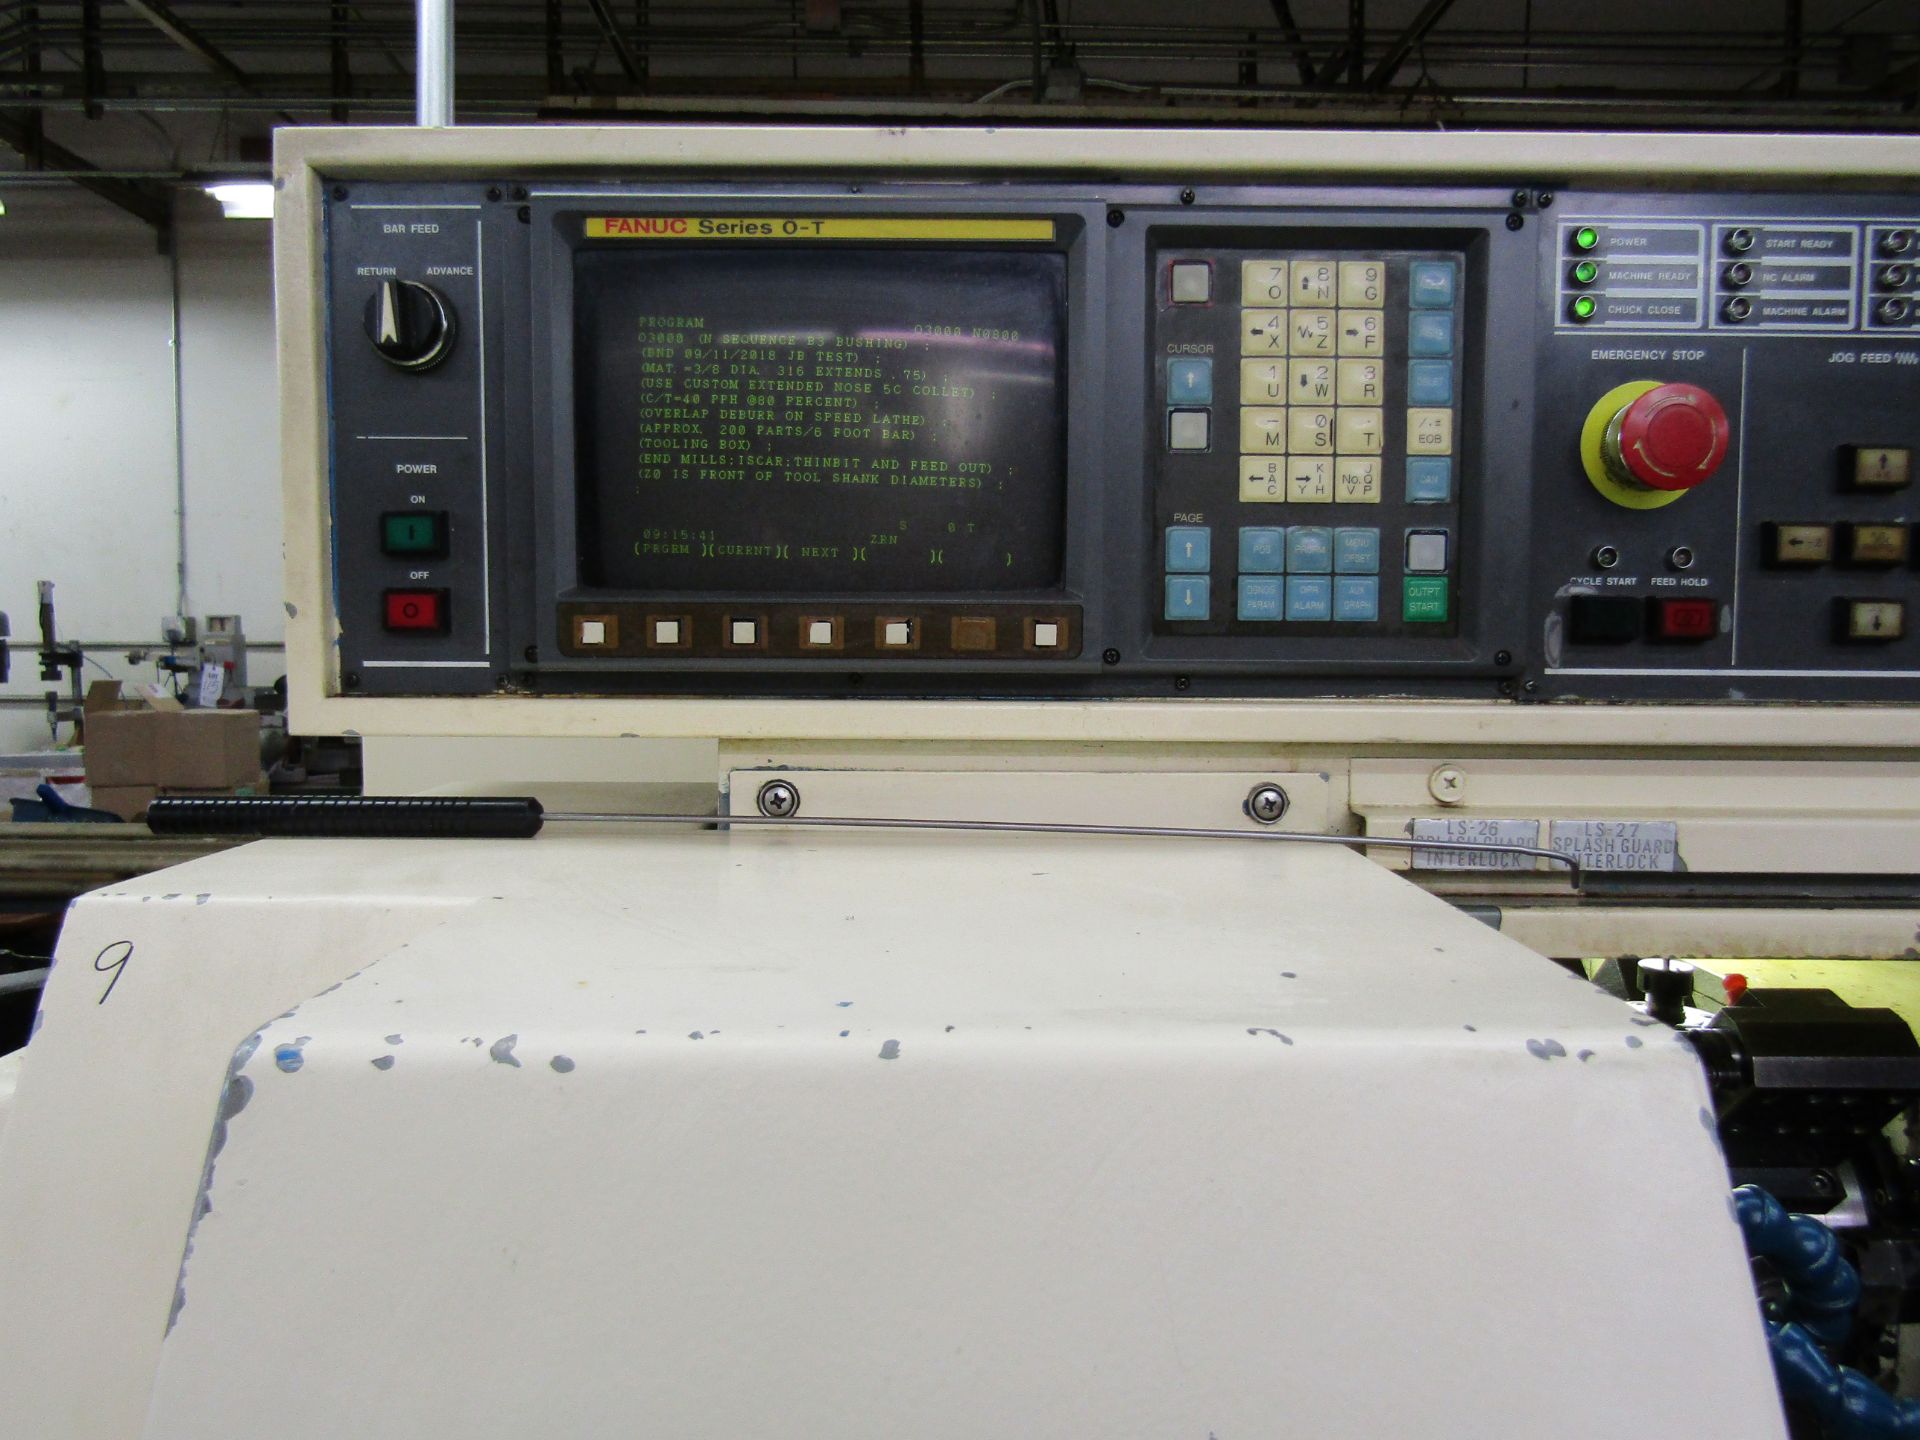 MIYANO BNC-34S CNC TURNING CENTER, SUB SPINDLE 4" CHUCK, 10 TOOL ATC, WITH TOOLING, FANUC SERIES - Image 6 of 9